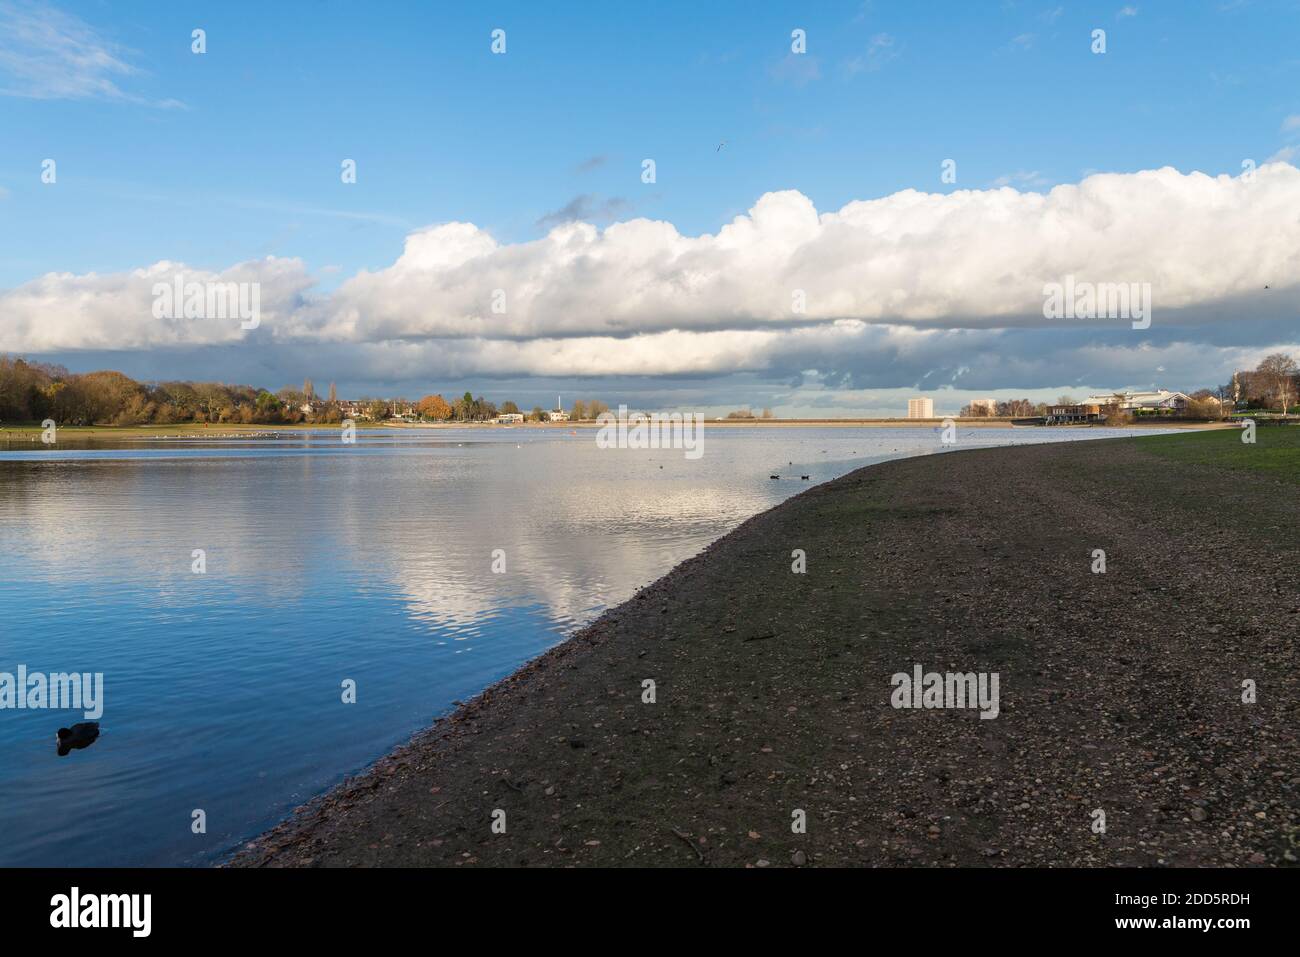 Edgbaston reservoir which is a feeder reservoir for the canal network in Birmingham, UK Stock Photo